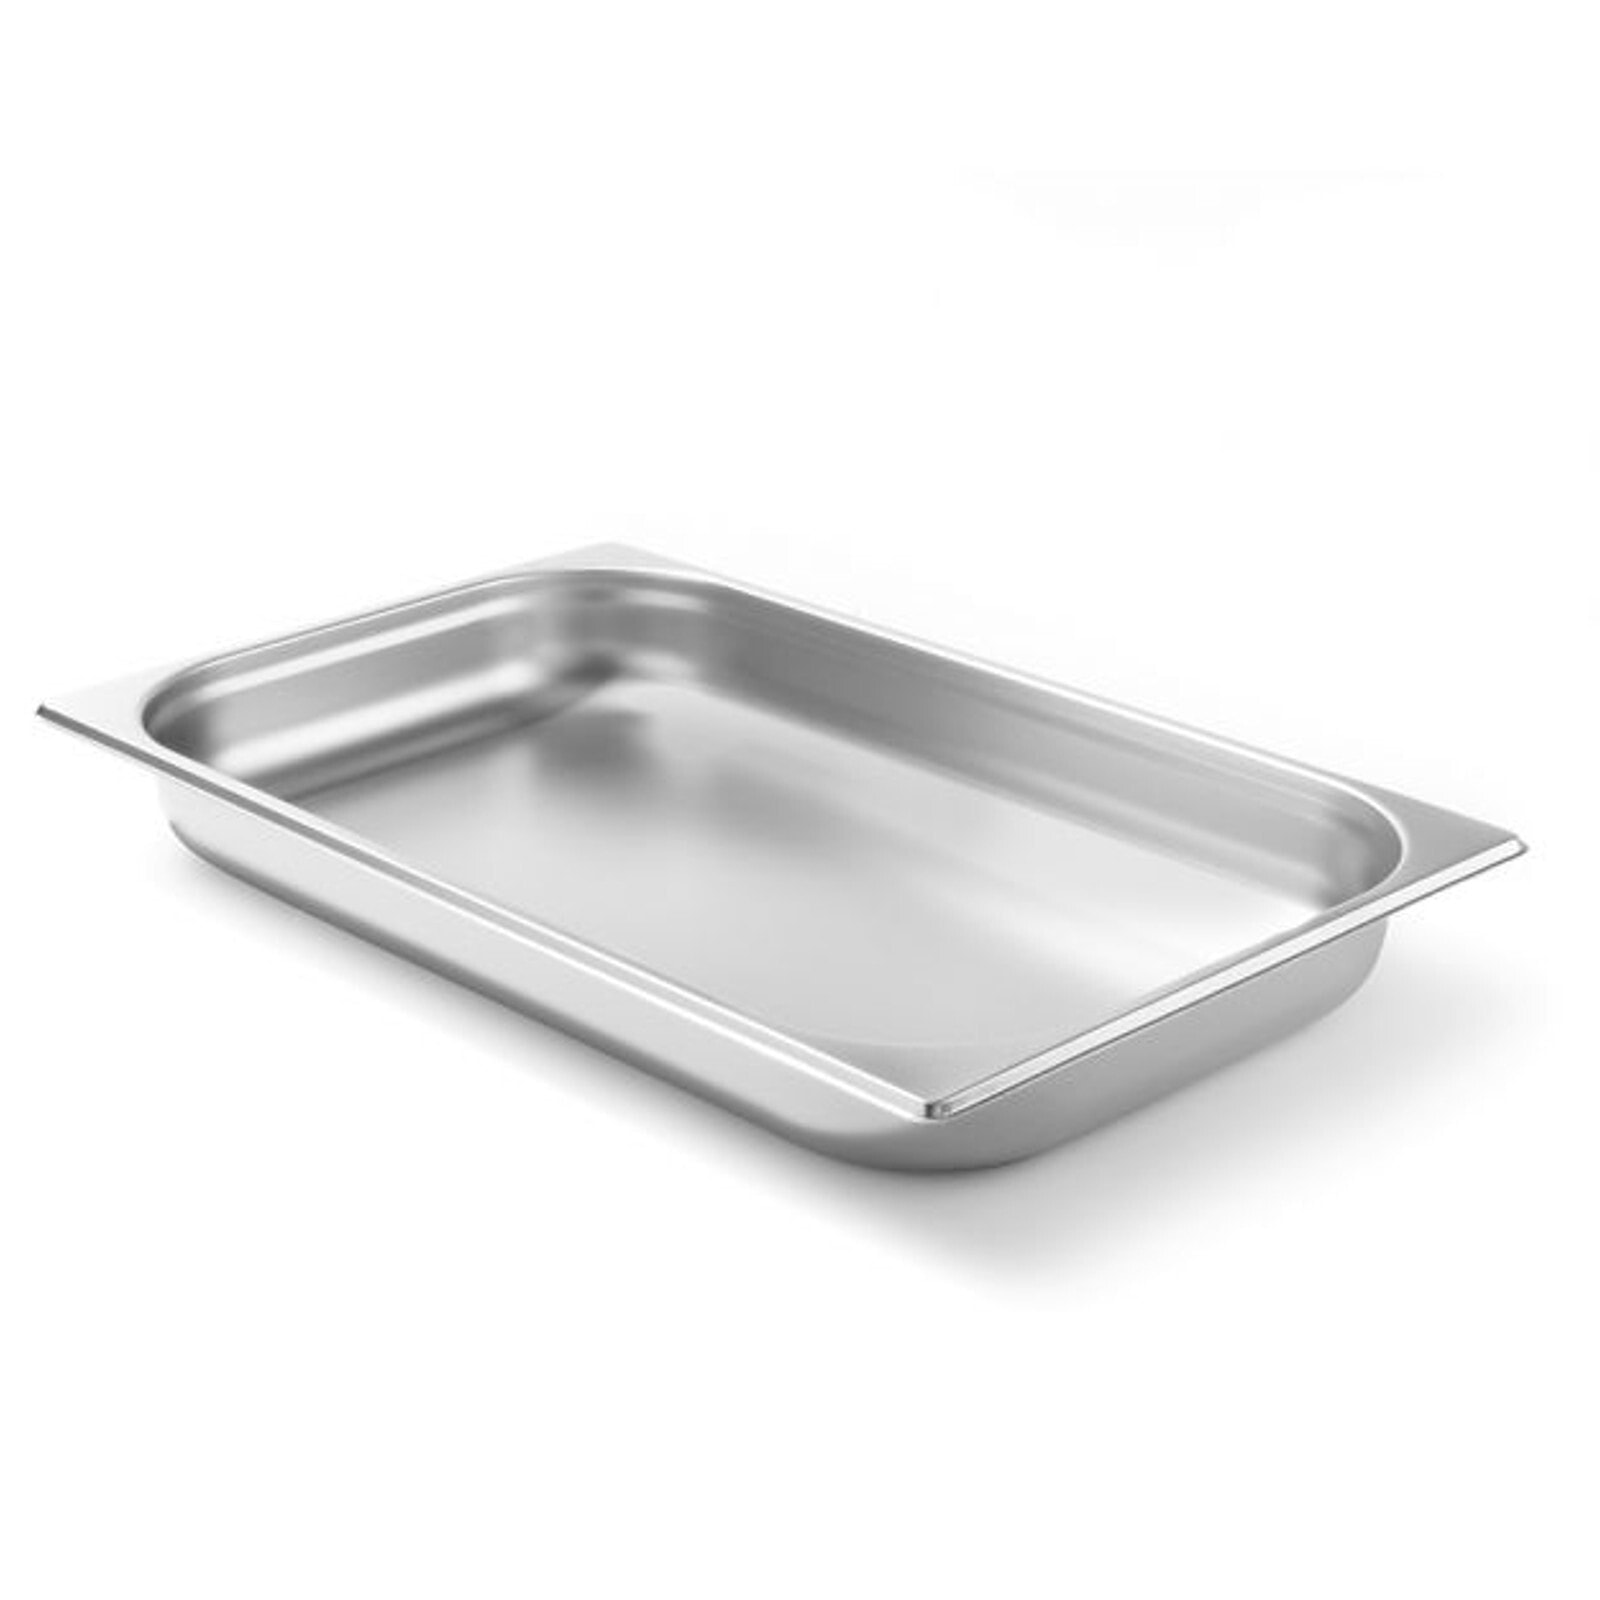 GN container 1/1, height 65 mm, made of stainless steel - Hendi 800126